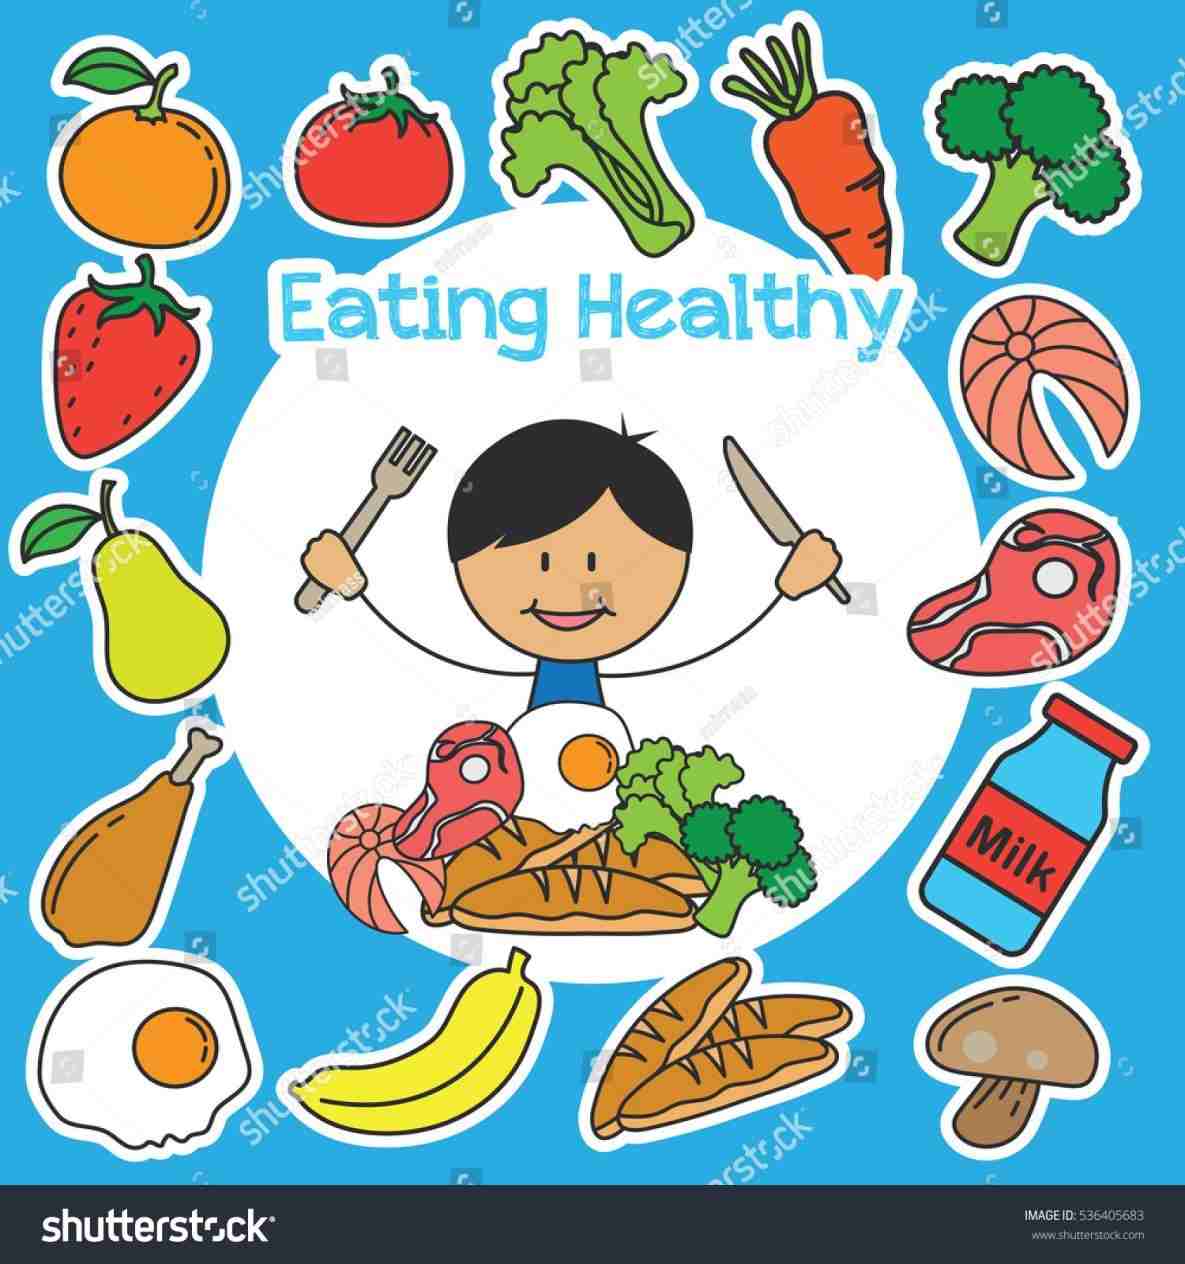 Kids Eating Healthy Foods Clipart of healthy eating